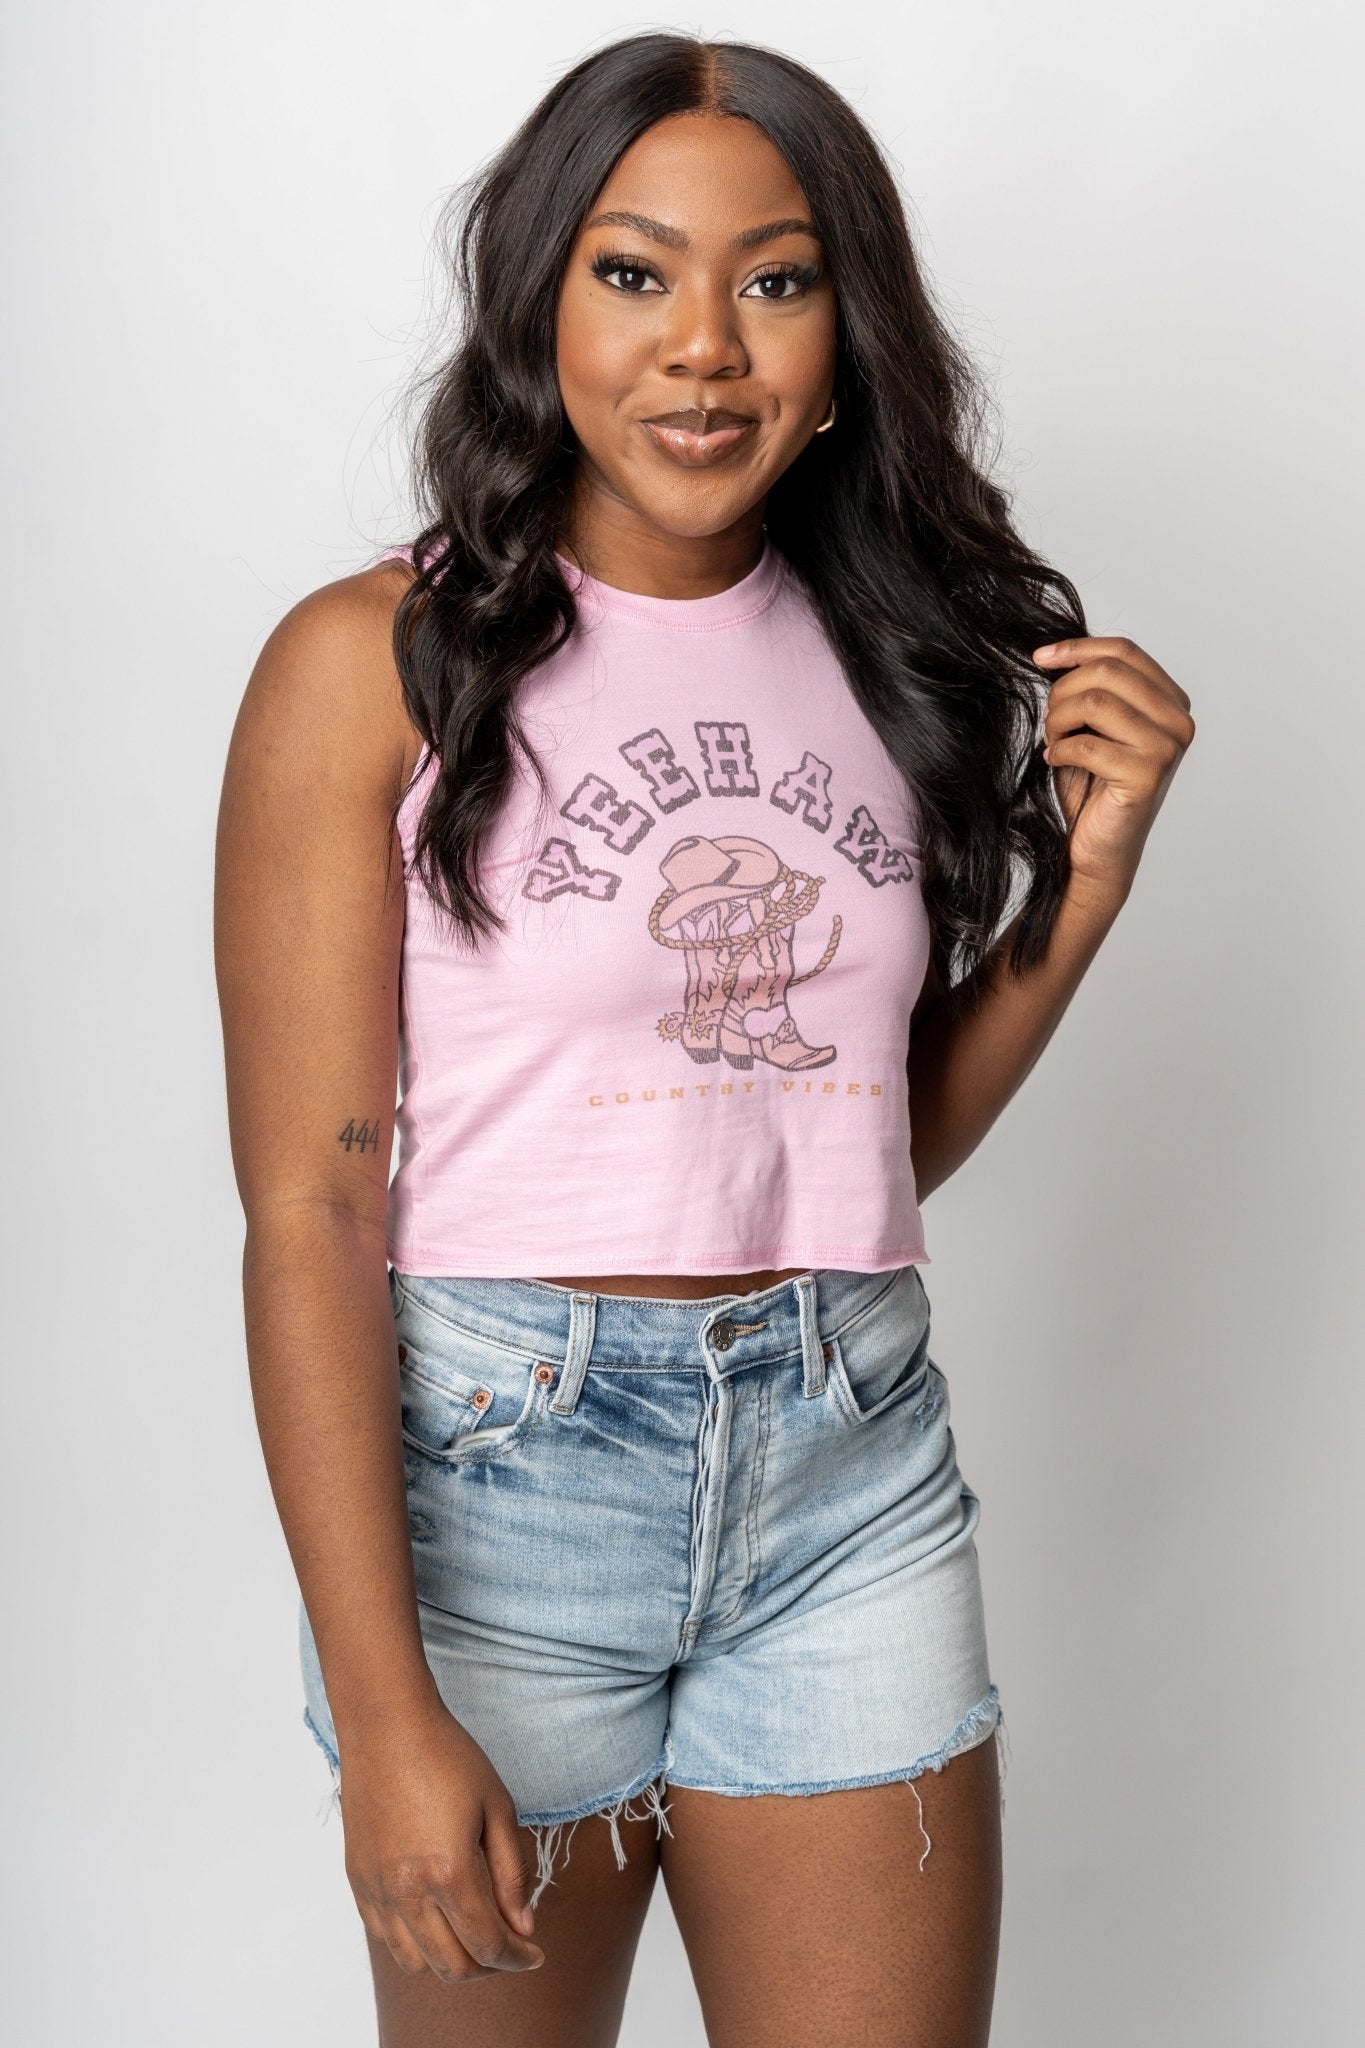 Yeehaw graphic crop tank top pink - Affordable Tank Top - Boutique Tank Tops at Lush Fashion Lounge Boutique in Oklahoma City